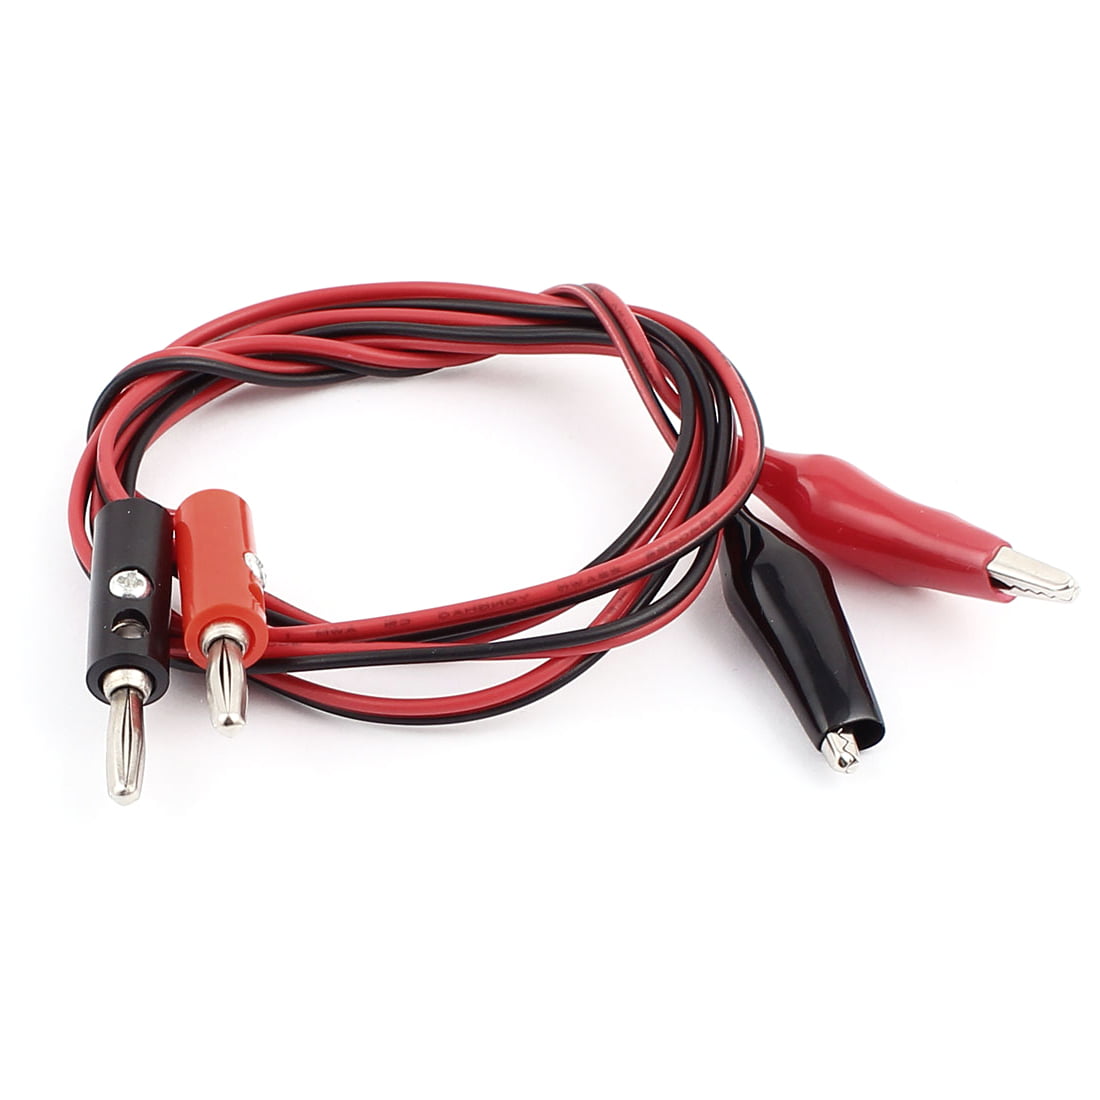 Black 1/2/5/10 Sets Alligator Test Lead Clip To Banana Plug Probe Cable 1M Red 